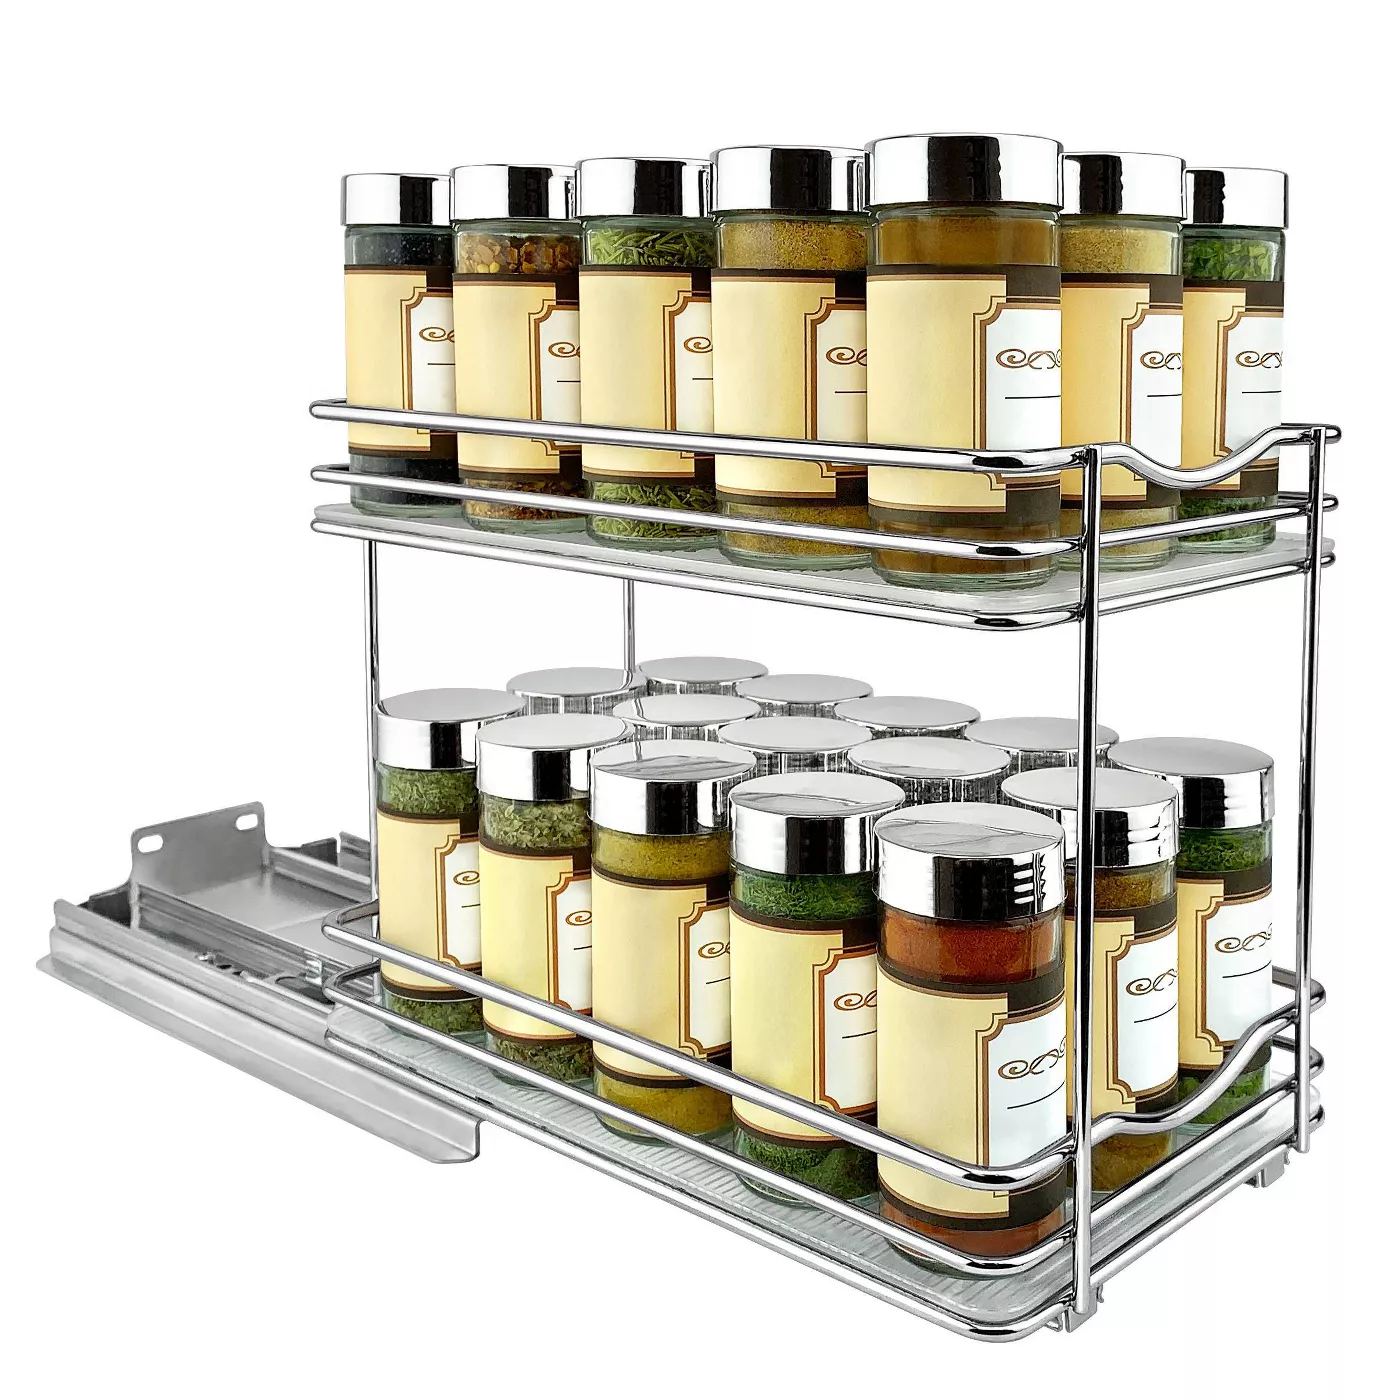 Lynk Professional Slide Out Double Spice Rack Upper Cabinet Organizer 6" Wide - image 1 of 8